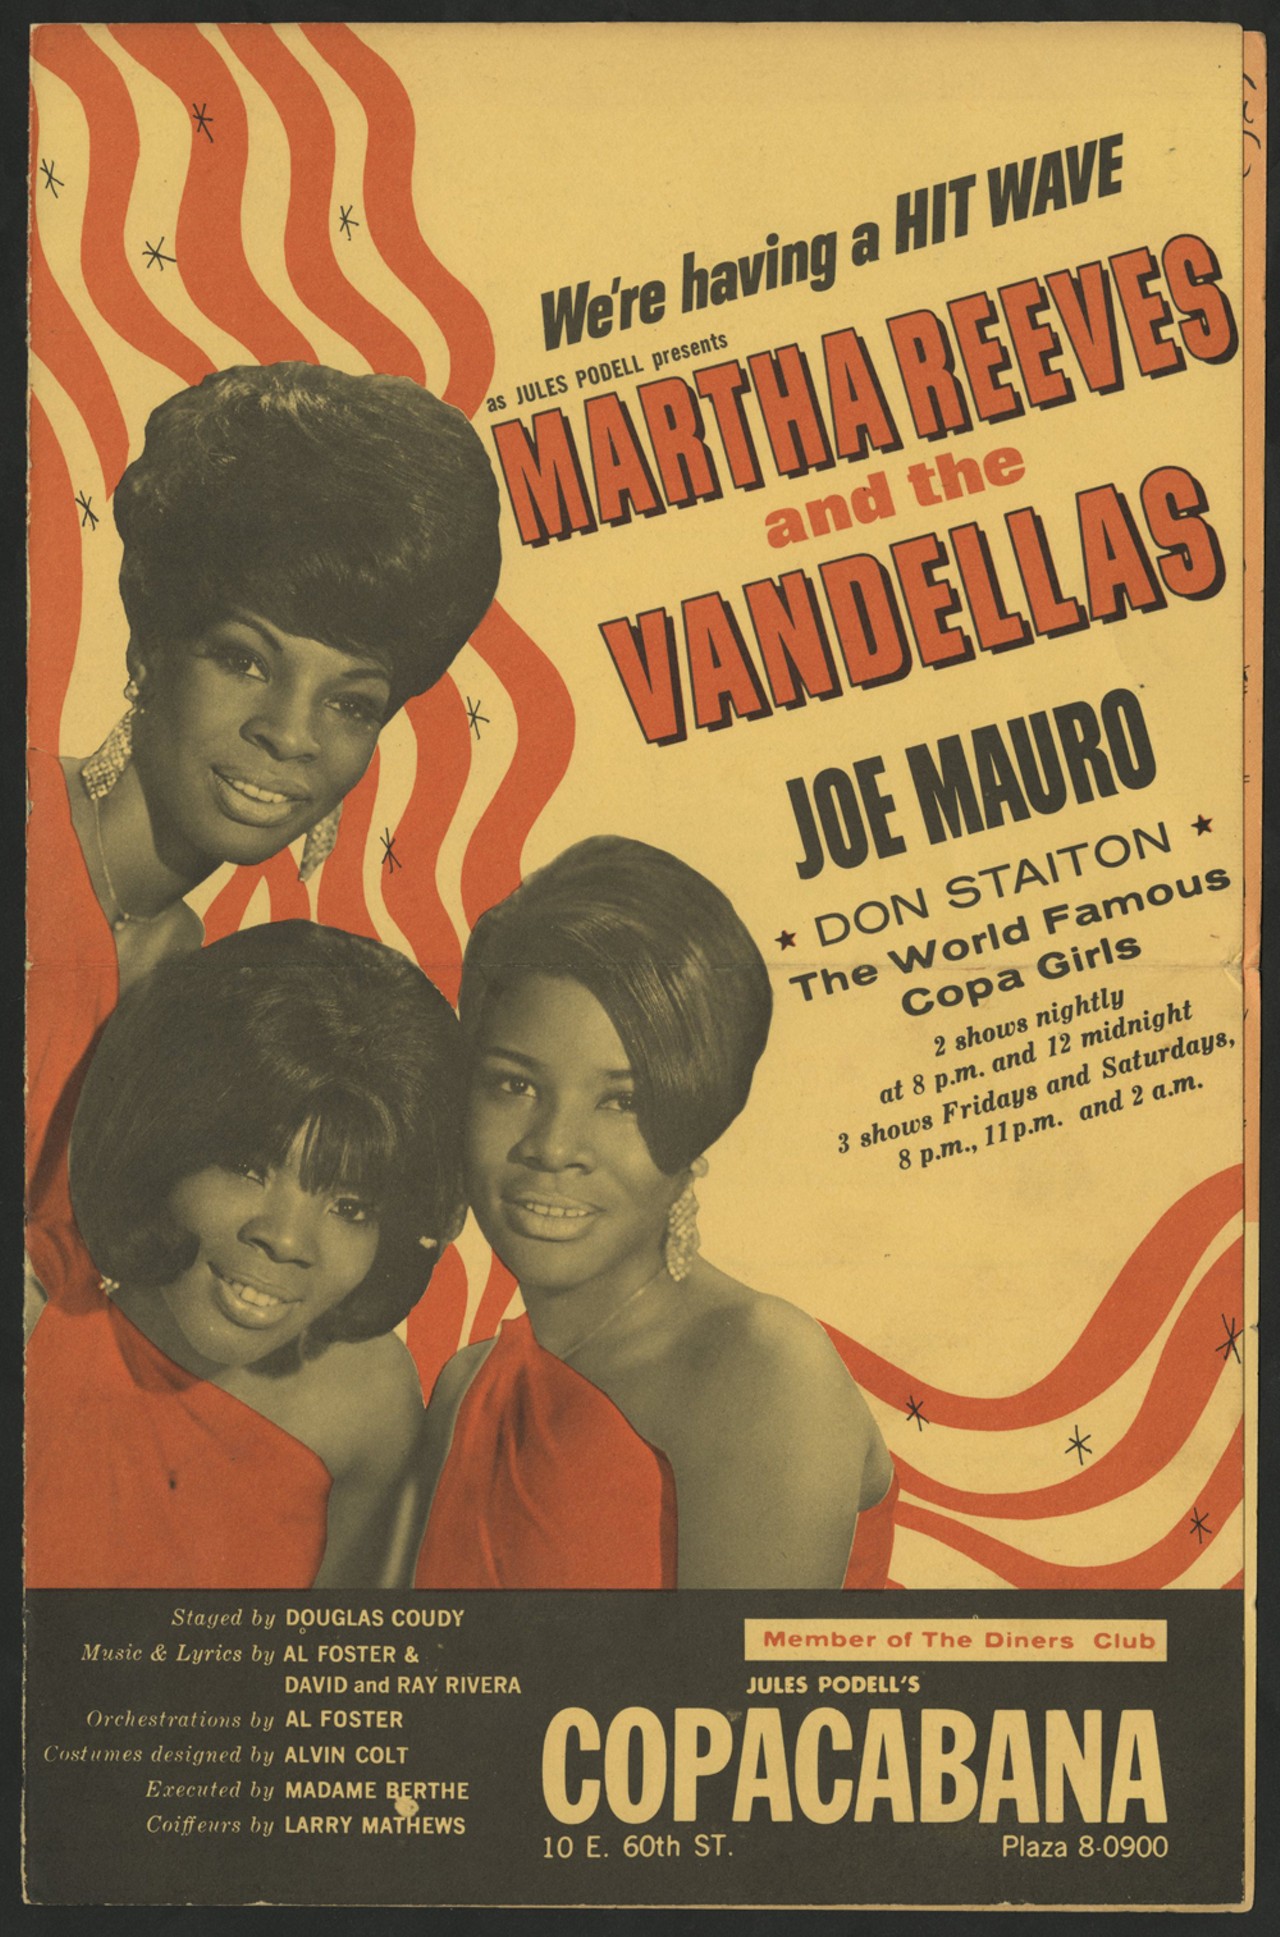 Promotional brochure for Martha and the Vandellas at the Copacabana, New York, circa 1968. (Rosalind Ashford-Holmes Collection)